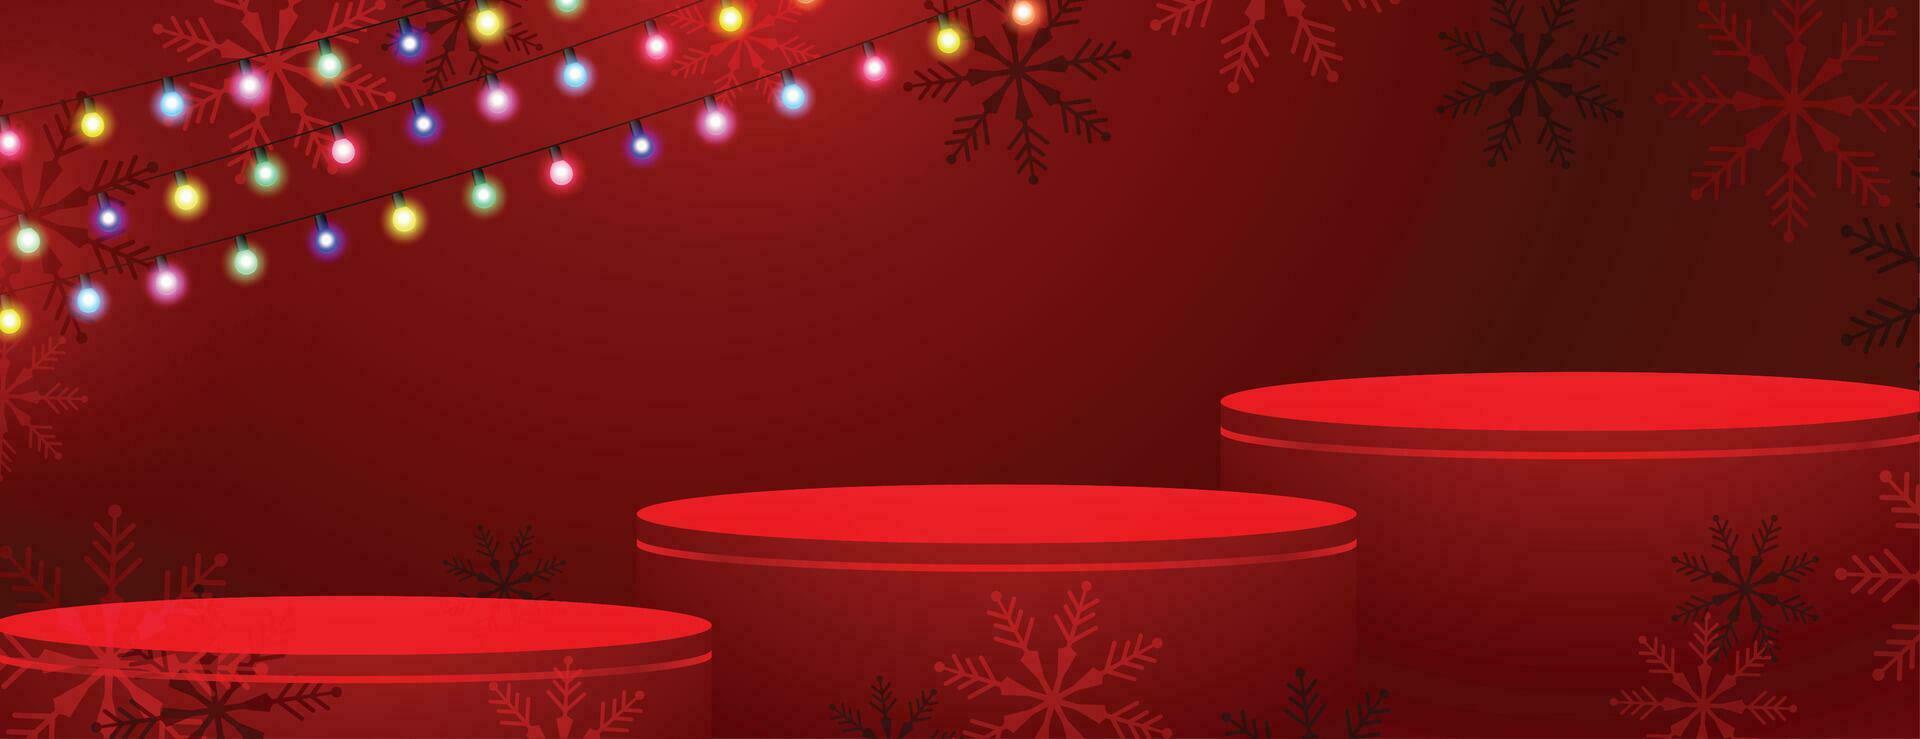 3d podium platform on merry christmas red banner with light string vector